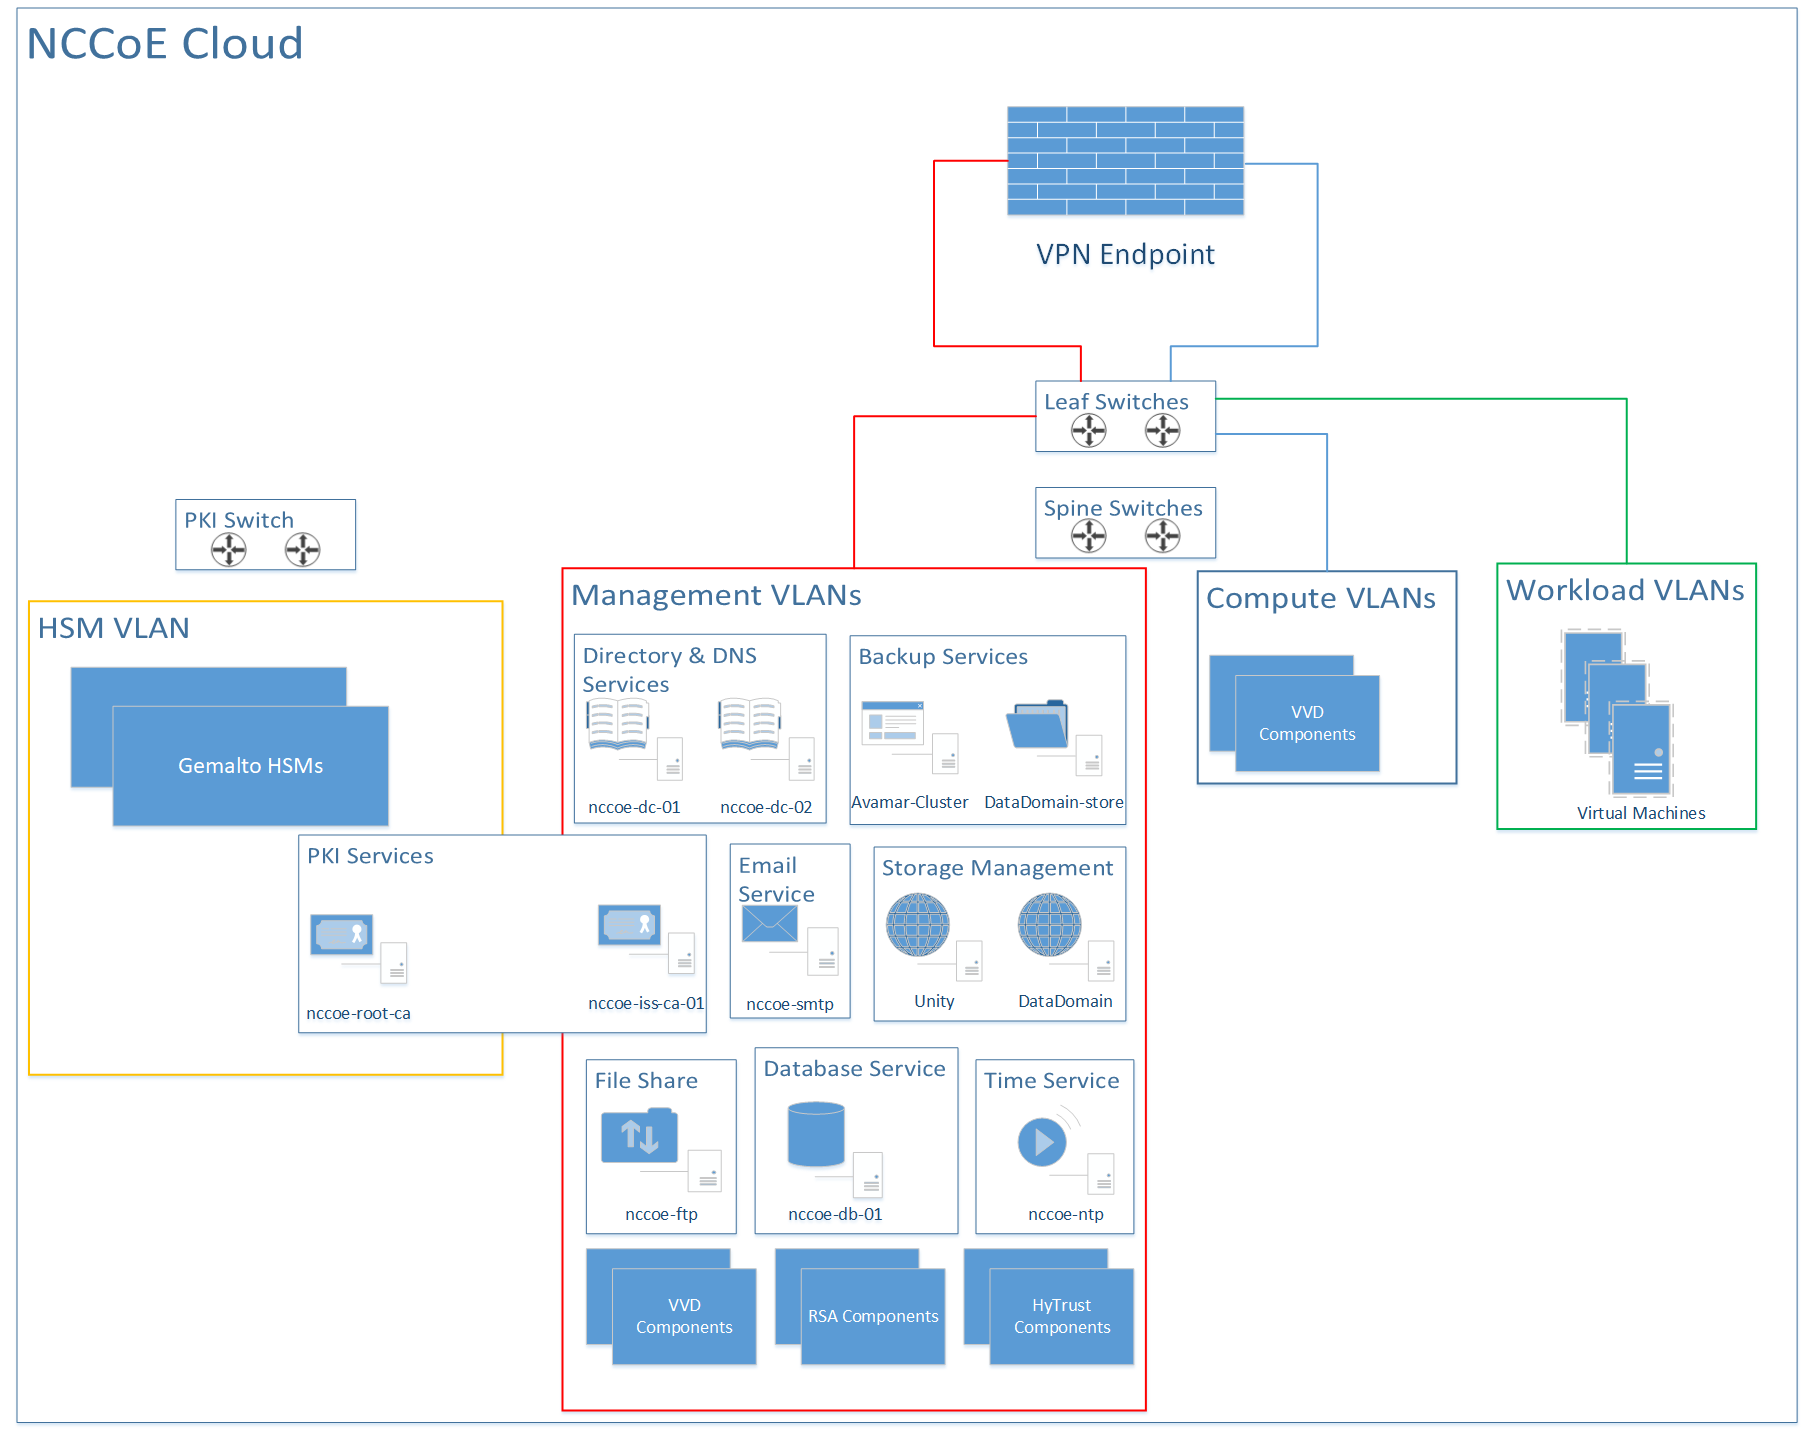 This figure provides a more detailed solution architecture diagram for the NCCoE cloud architecture.